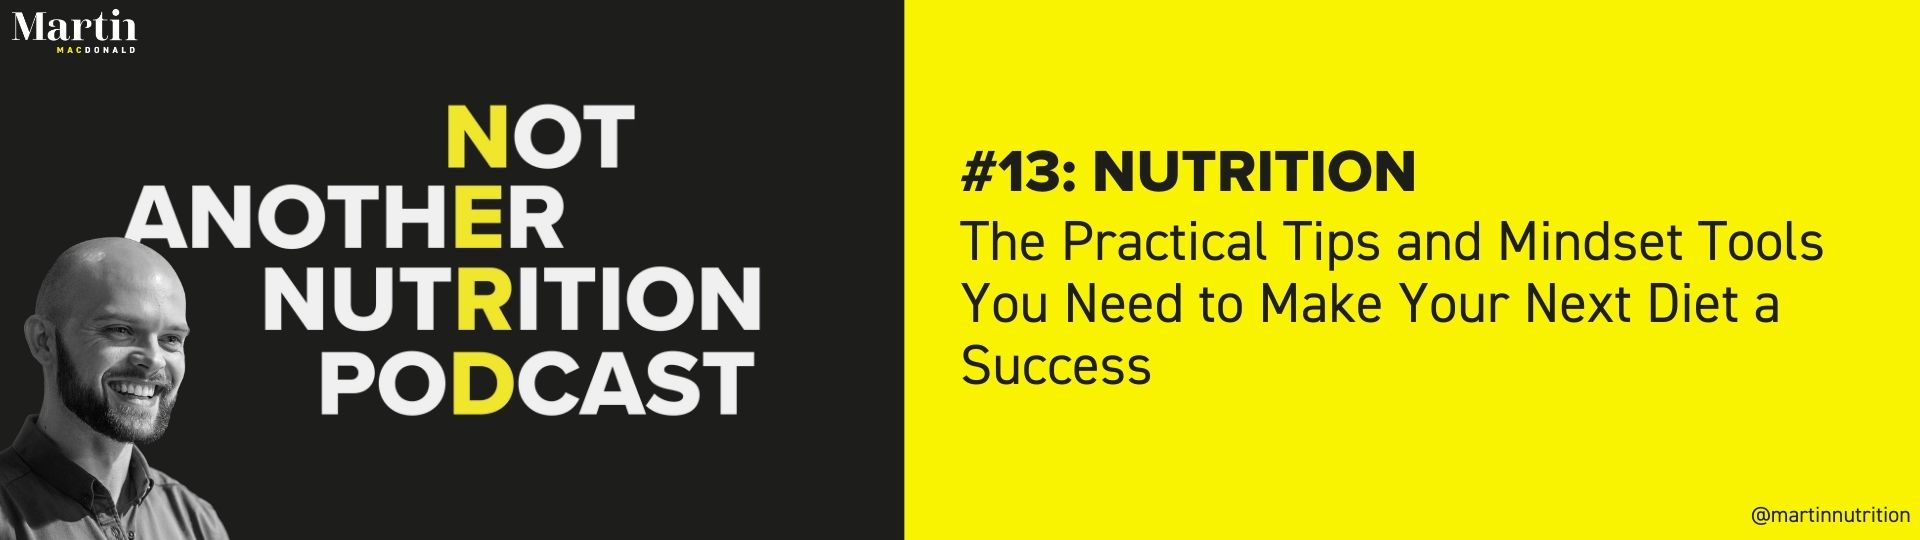 The Practical Tips and Mindset Tools You Need to Make Your Next Diet a Success